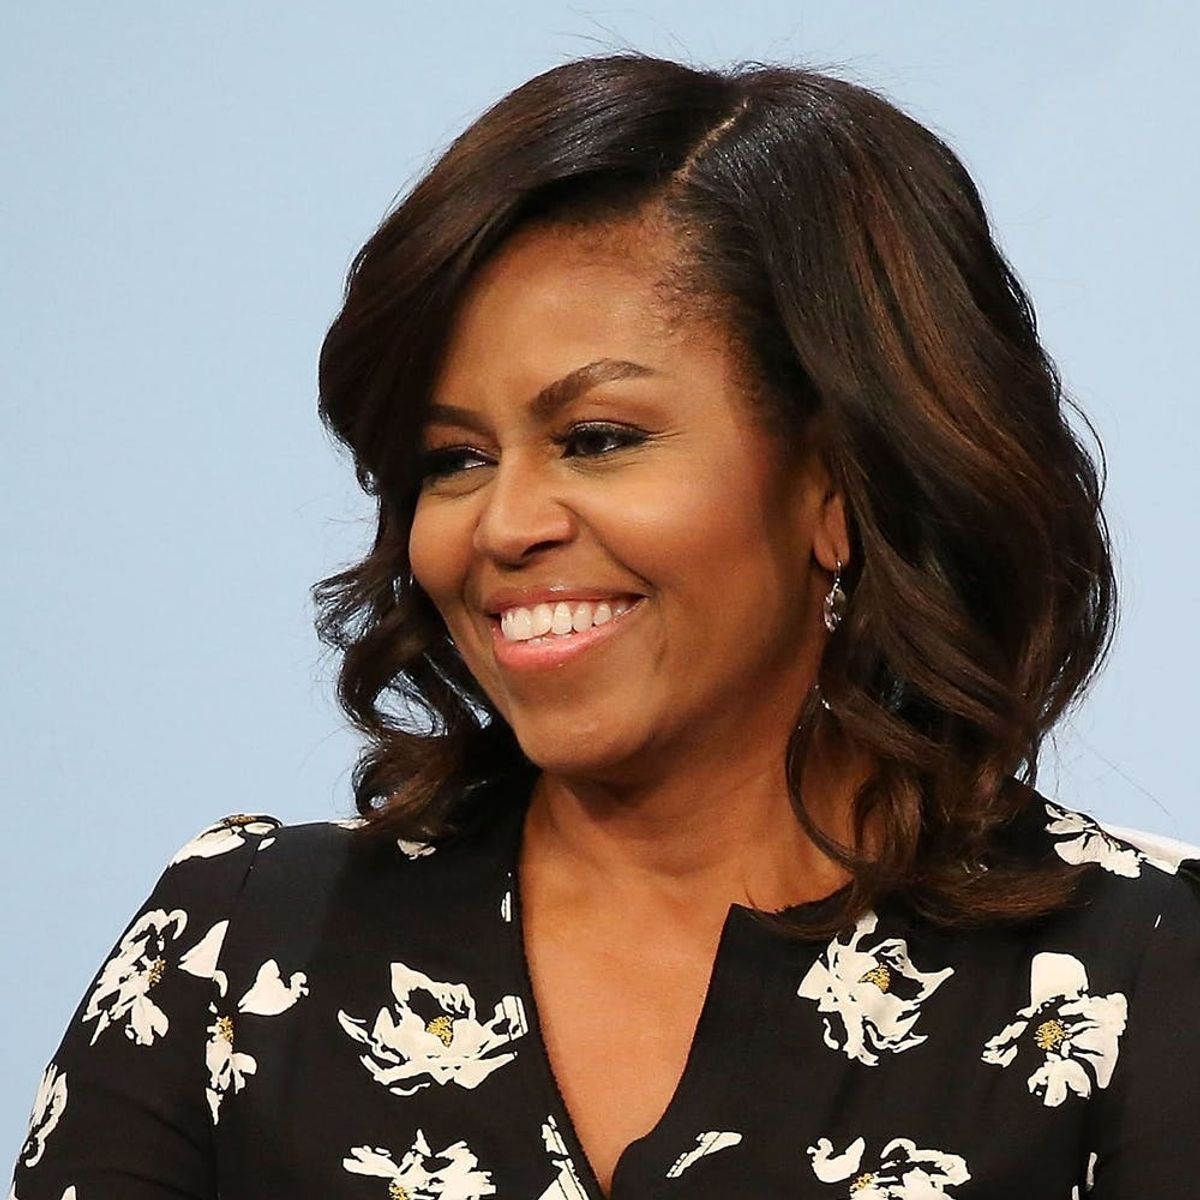 Michelle Obama’s IVF Revelation Sheds Light on a Fertility Option Many American Women May Soon Lose